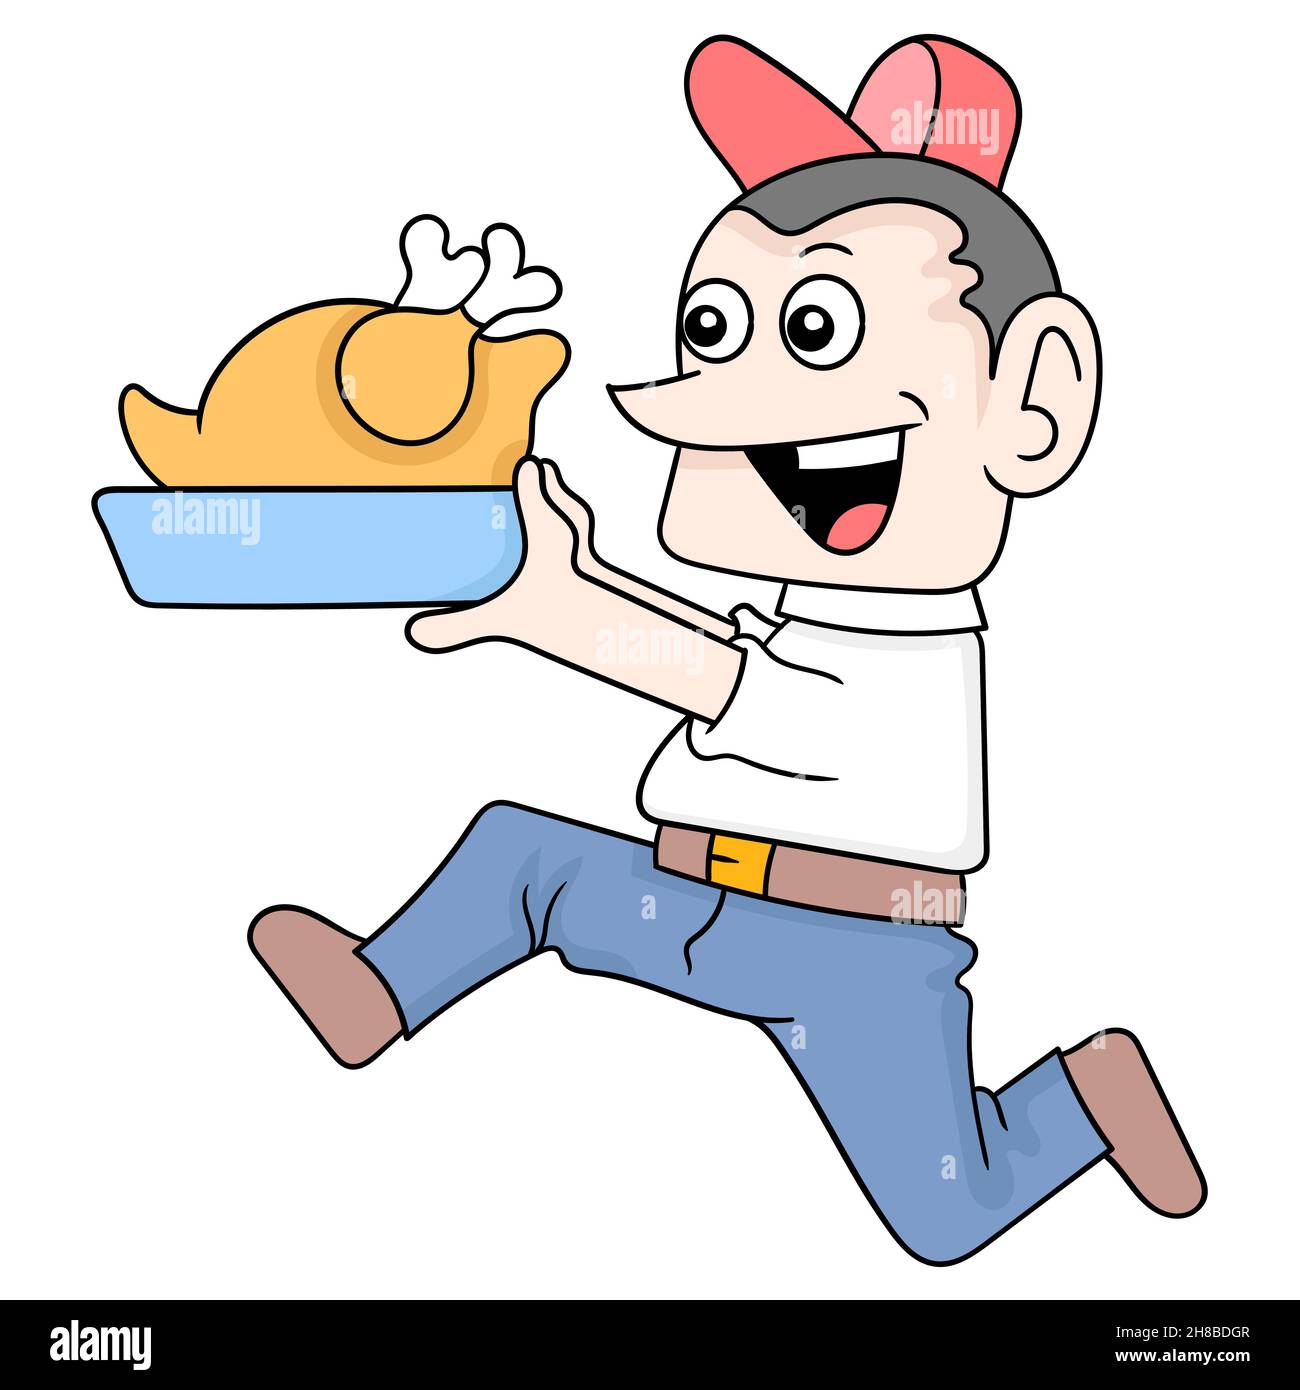 male waiter running around serving delicious grilled chicken, vector illustration art. doodle icon image kawaii. Stock Vector